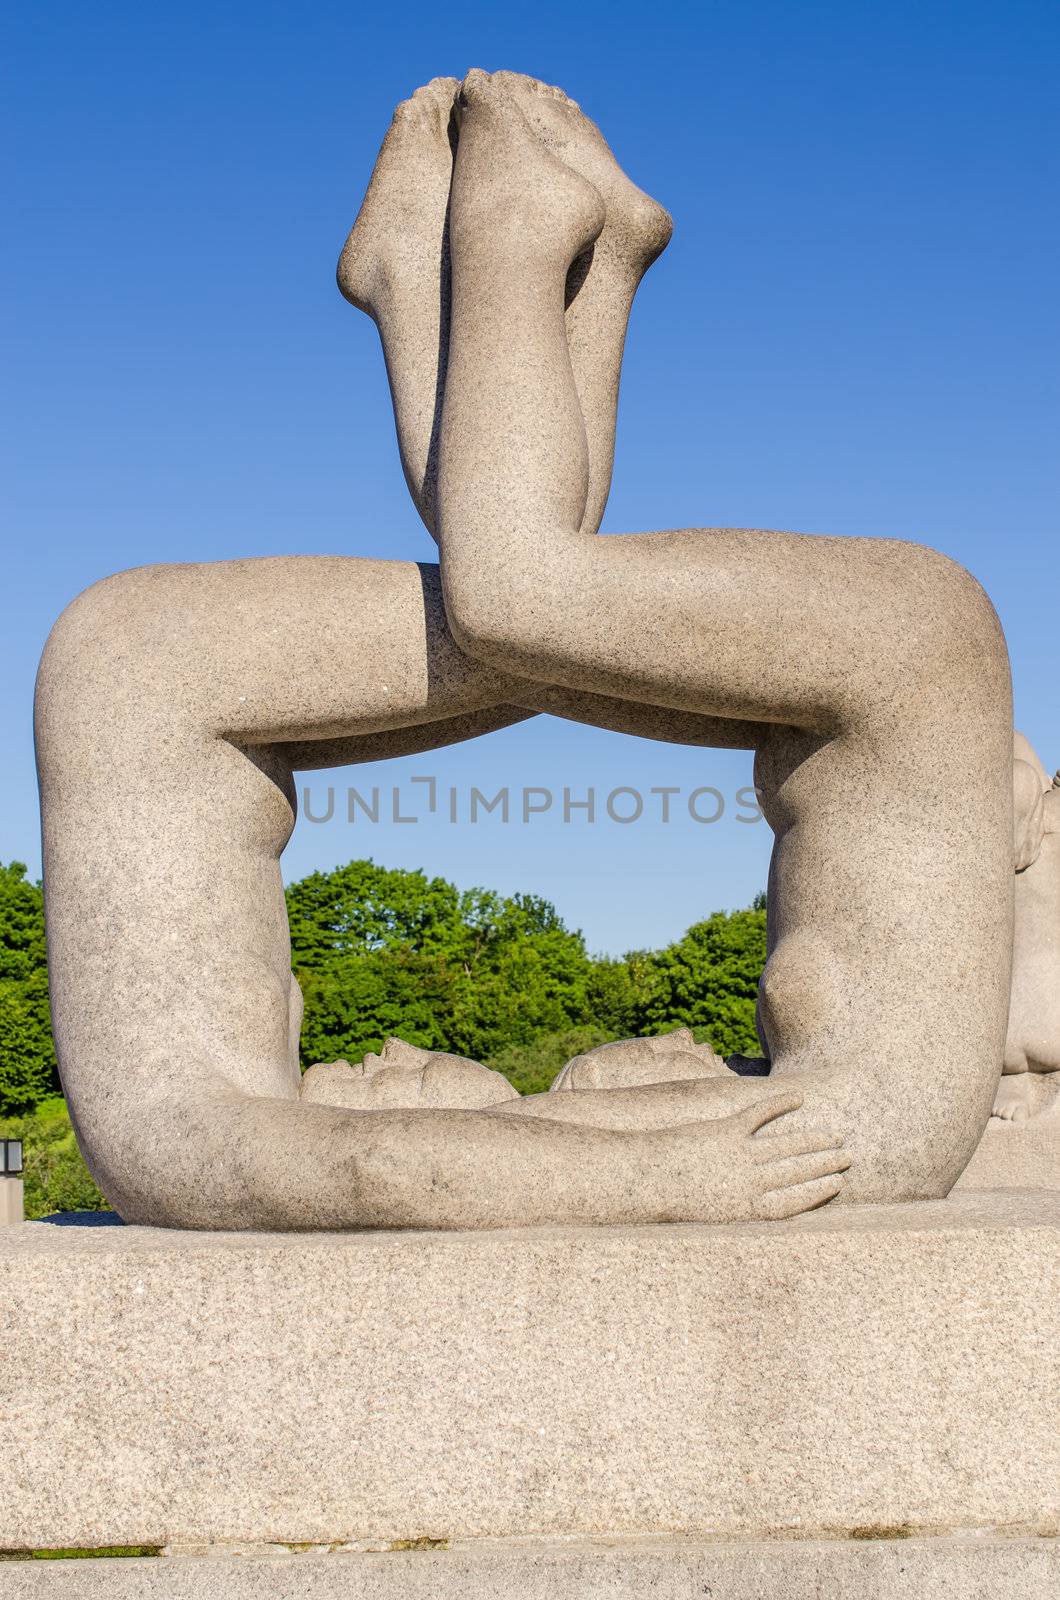 OSLO, NORWAY - JUNE 19: Statues in Vigeland park in Oslo, Norway on June 19, 2012.The park covers 80 acres and features 212 bronze and granite sculptures created by Gustav Vigeland.